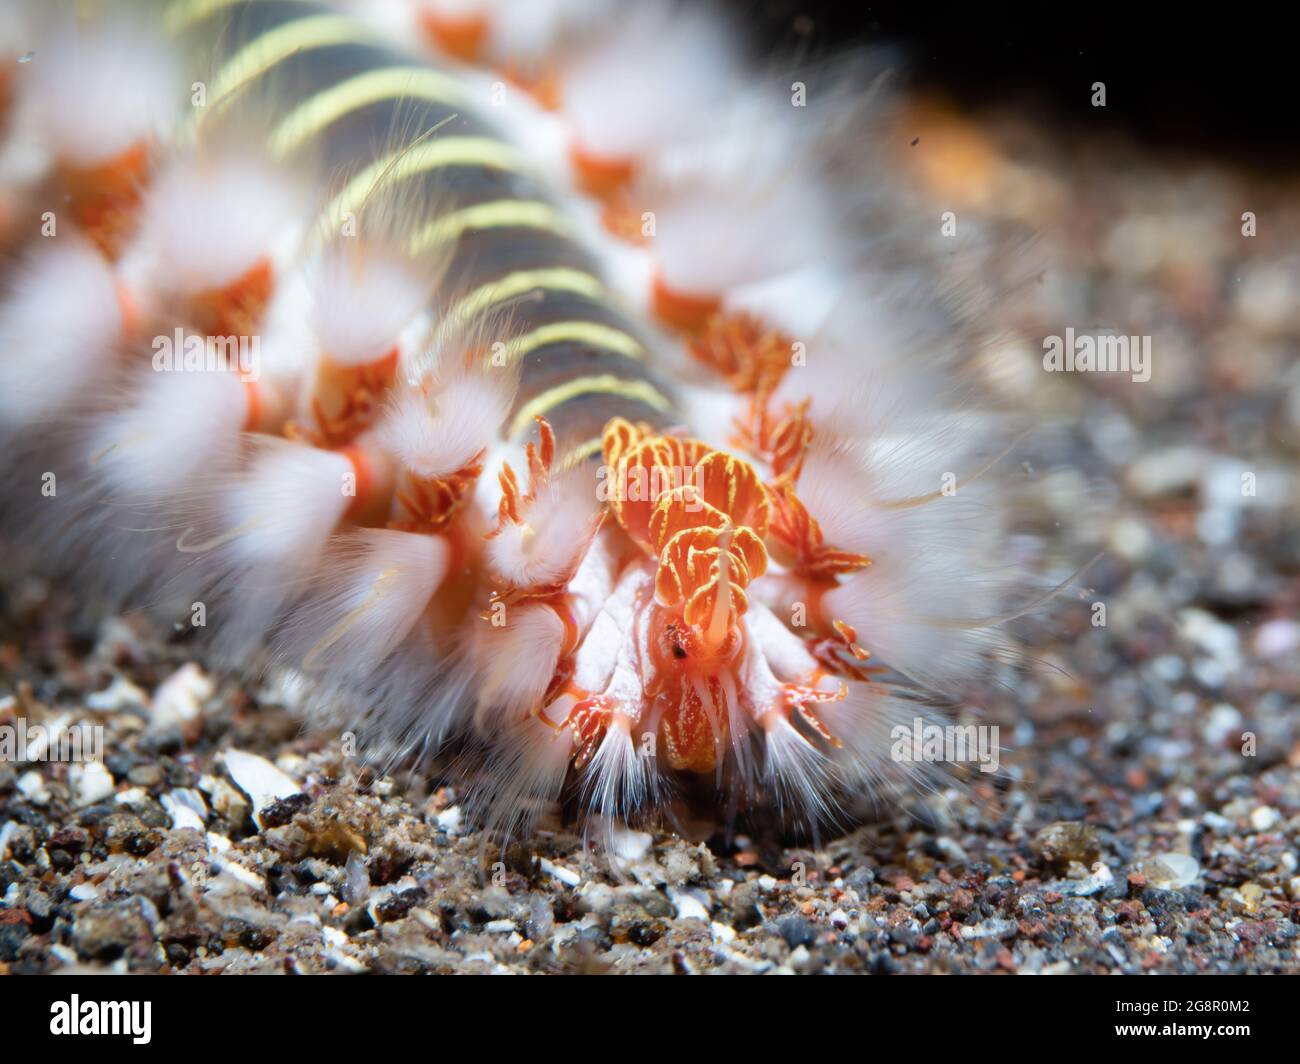 earded Fire Worm (Hermodice carunculata ) crawling on the sandy bottom, close-up, Madeira, Portugal Stock Photo